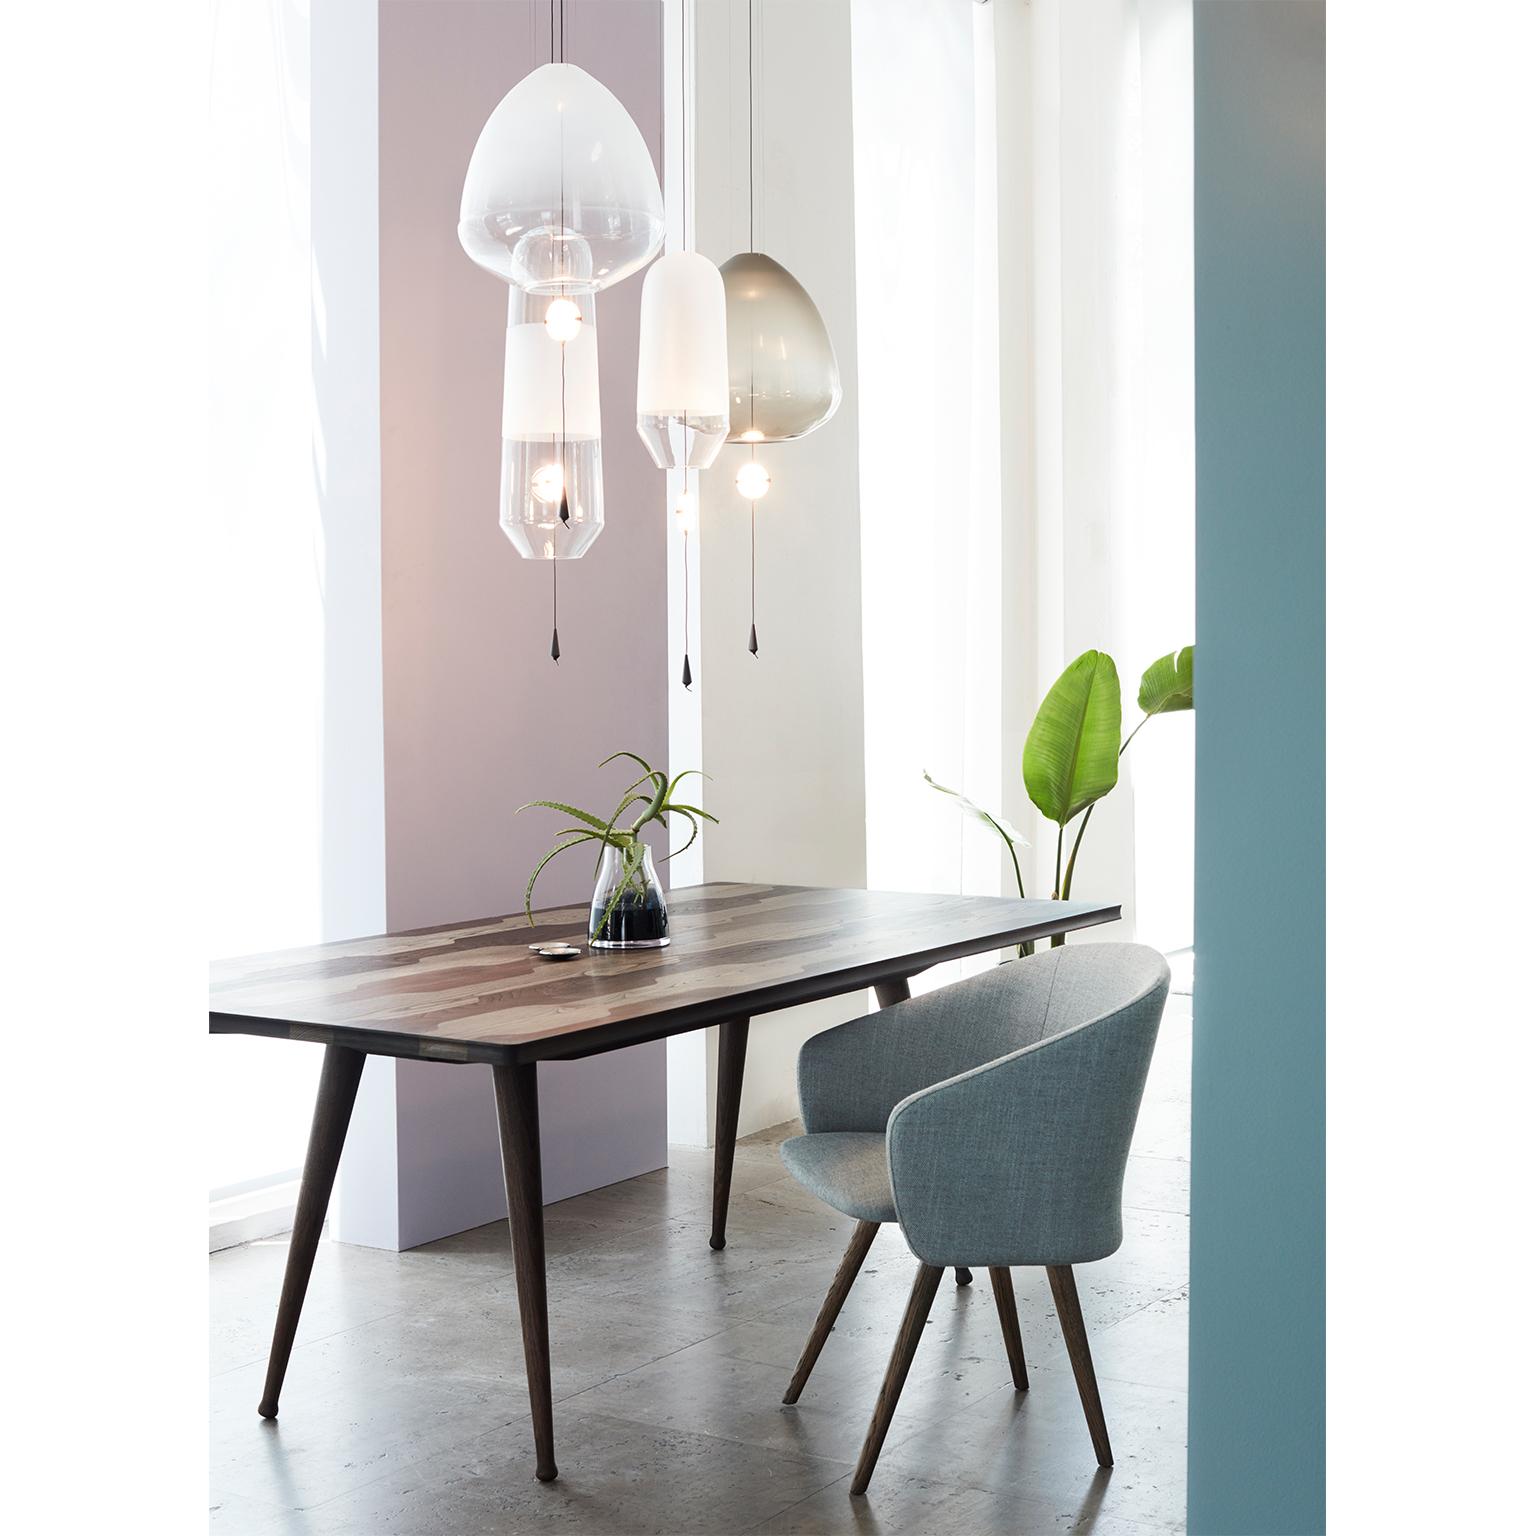 Limpid Light S-Clear Standard, Pendant Light, Hand Blown Glass, Europe In New Condition For Sale In Breda, Noord-Brabant